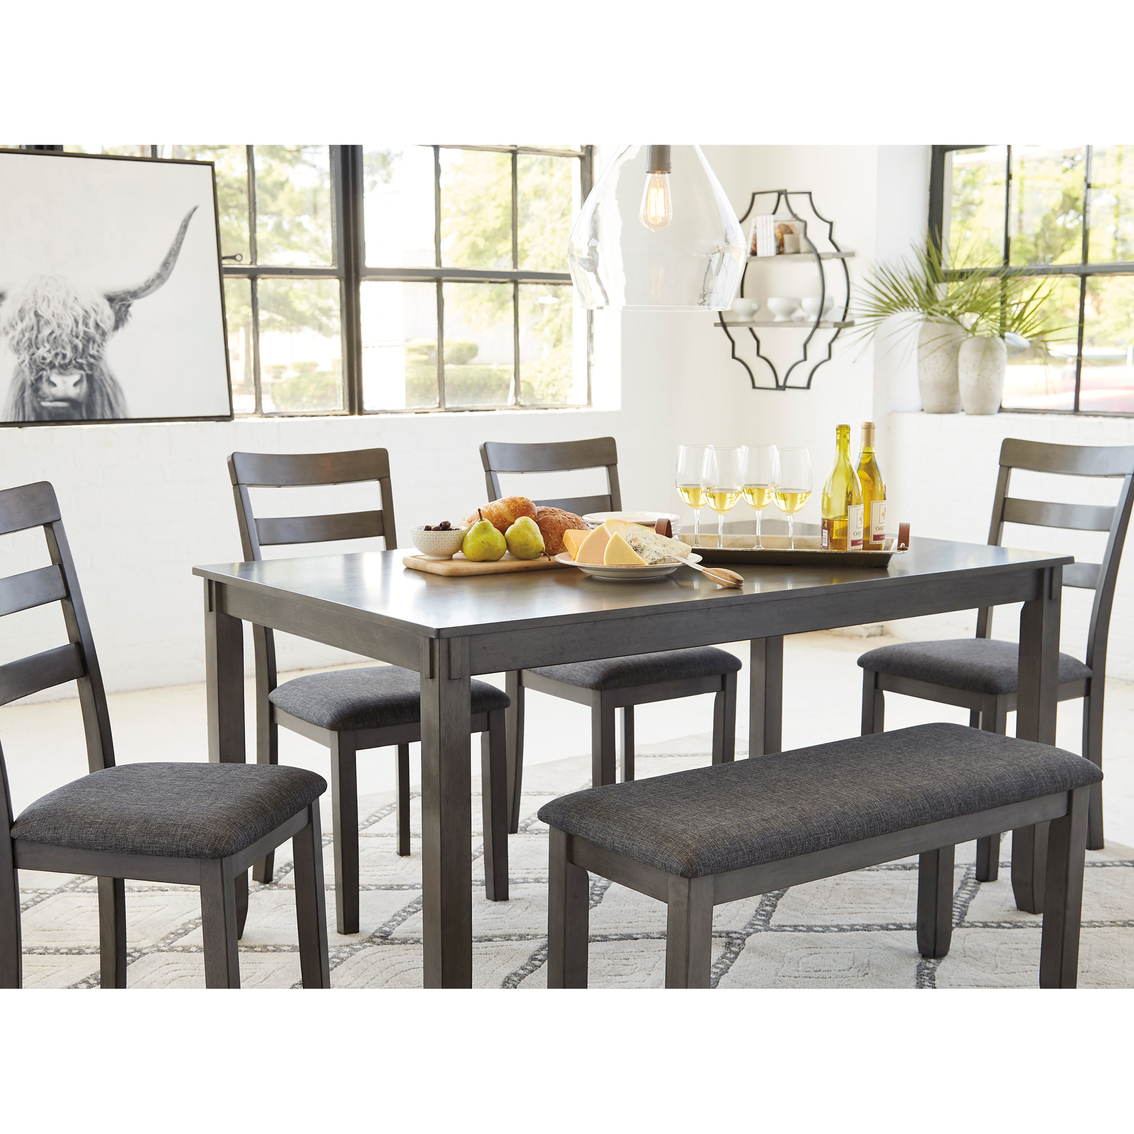 Signature Design by Ashley Bridson 6 pc. Rectangular Dining Set with Bench - Image 3 of 7